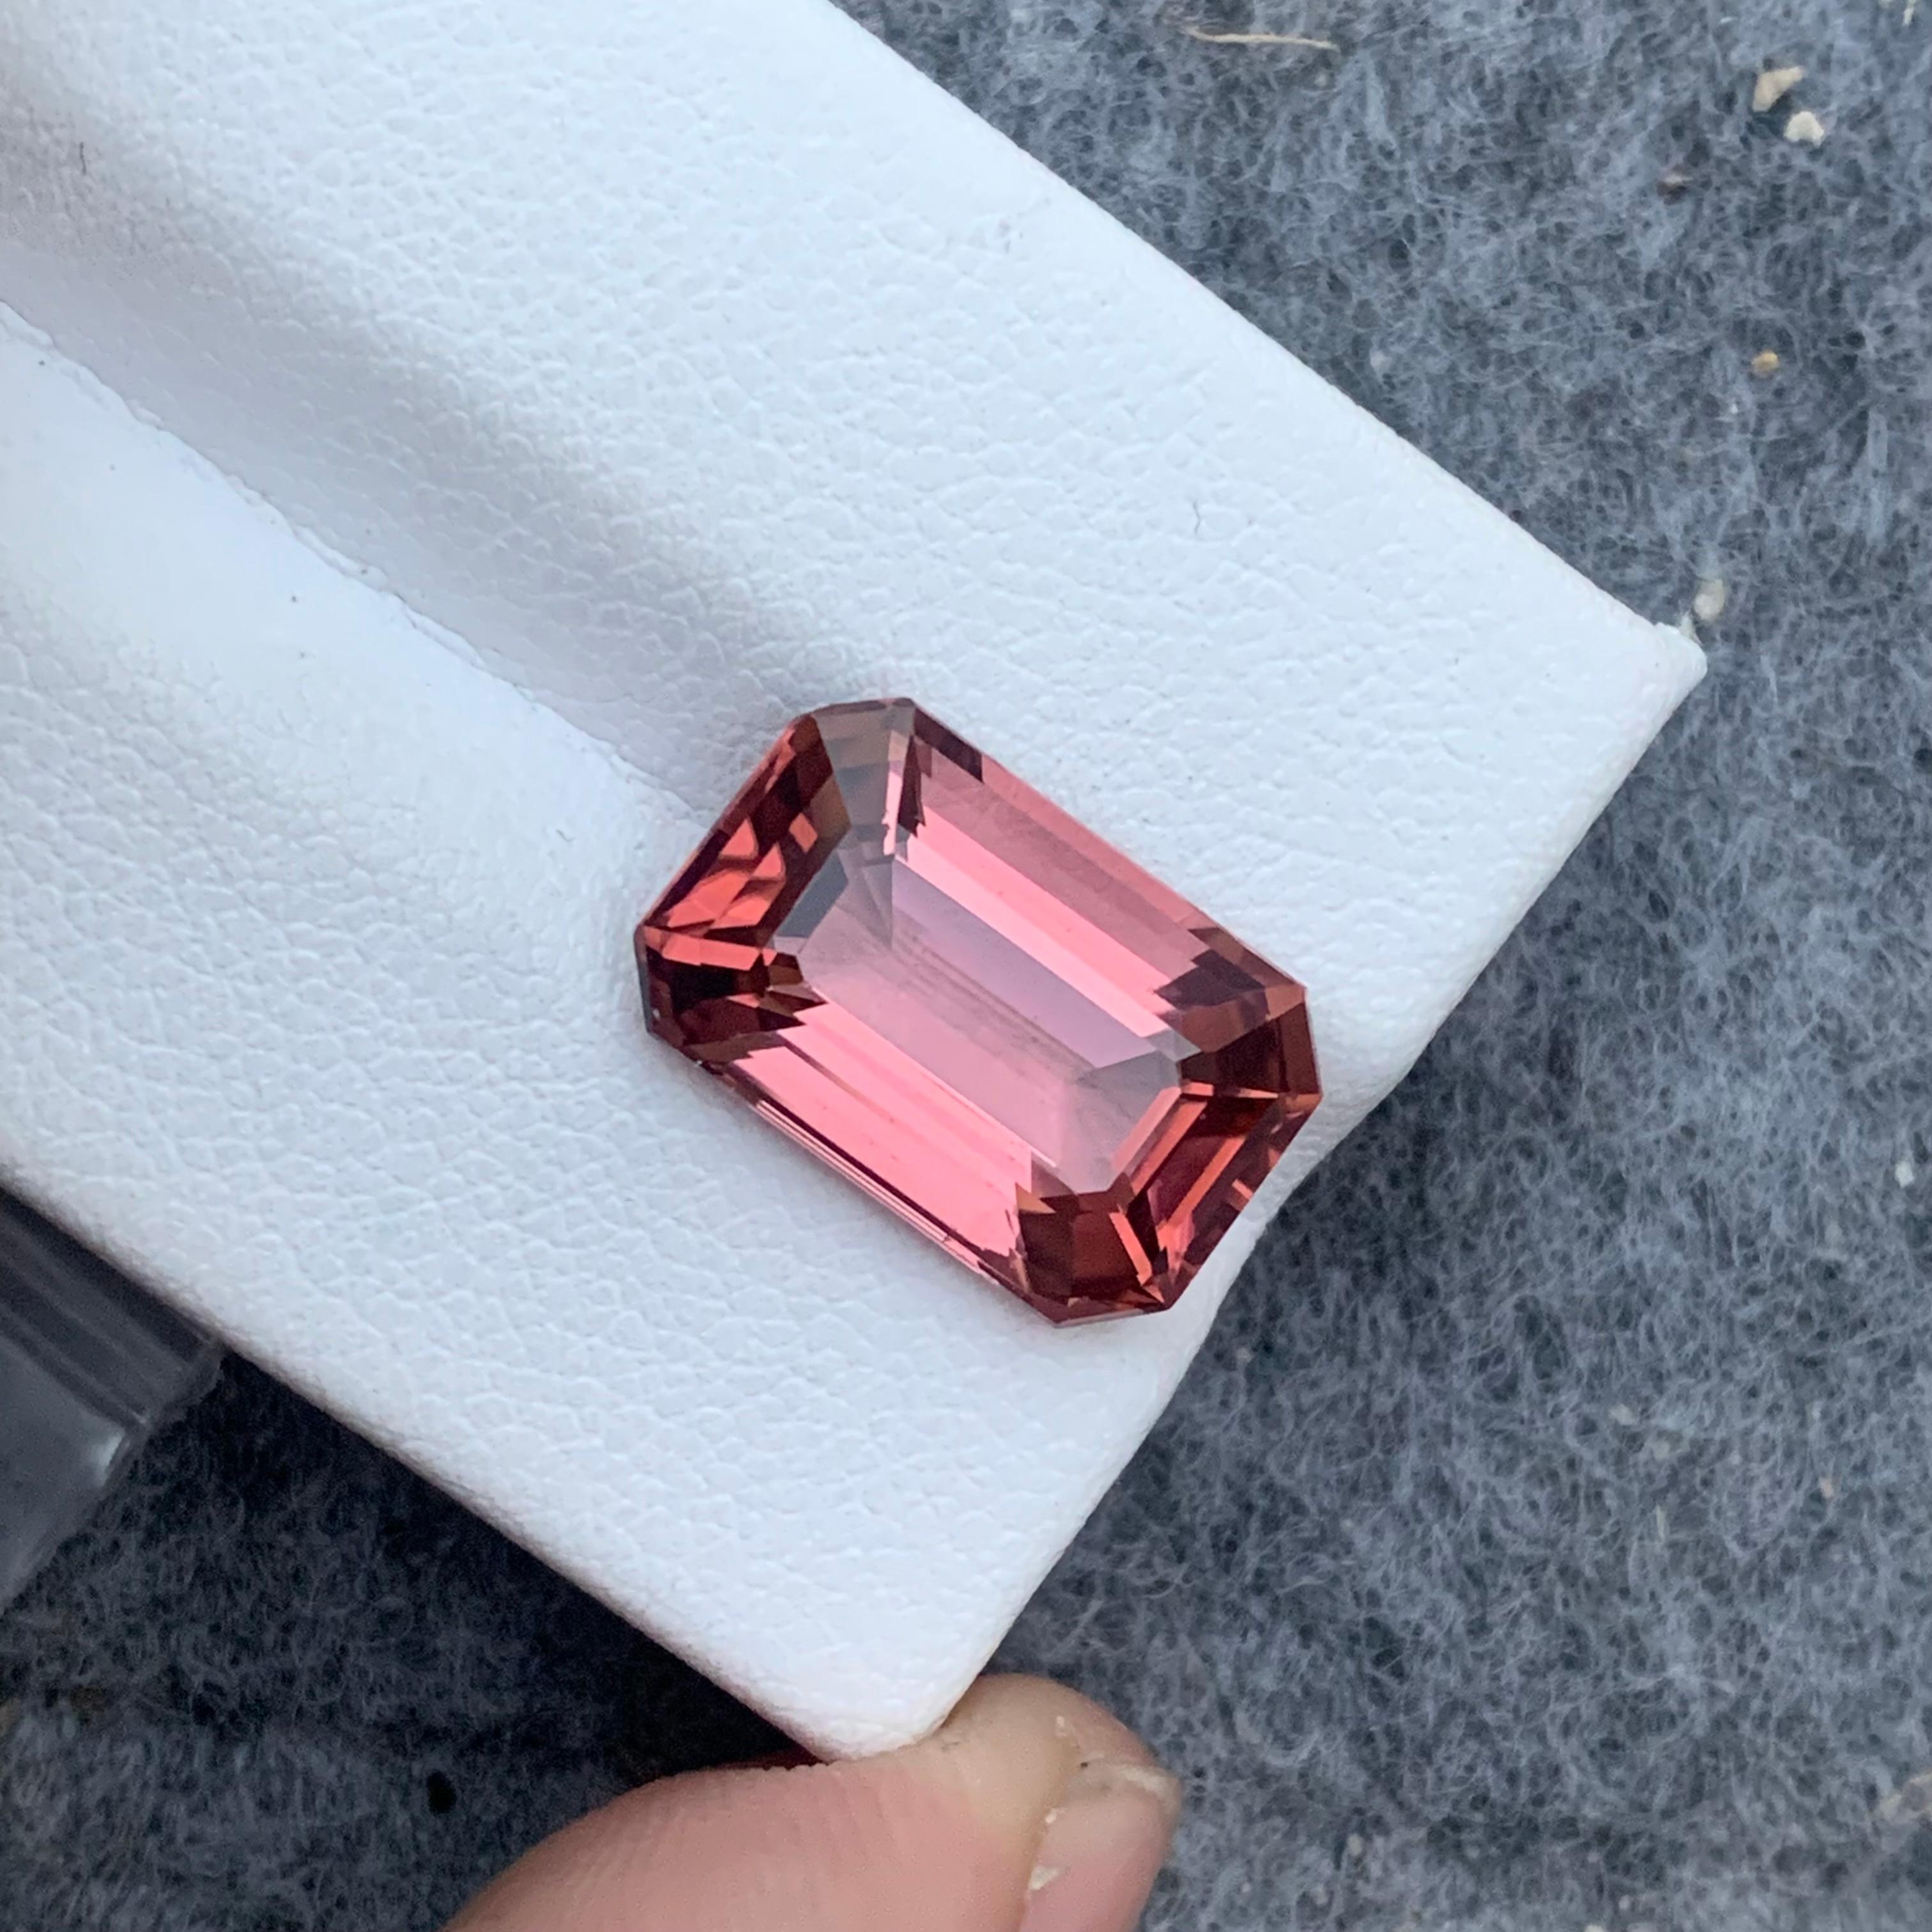 9.0 Carat AAA Quality Loose Soft Pink Tourmaline Emerald Cut From Afghanistan 2